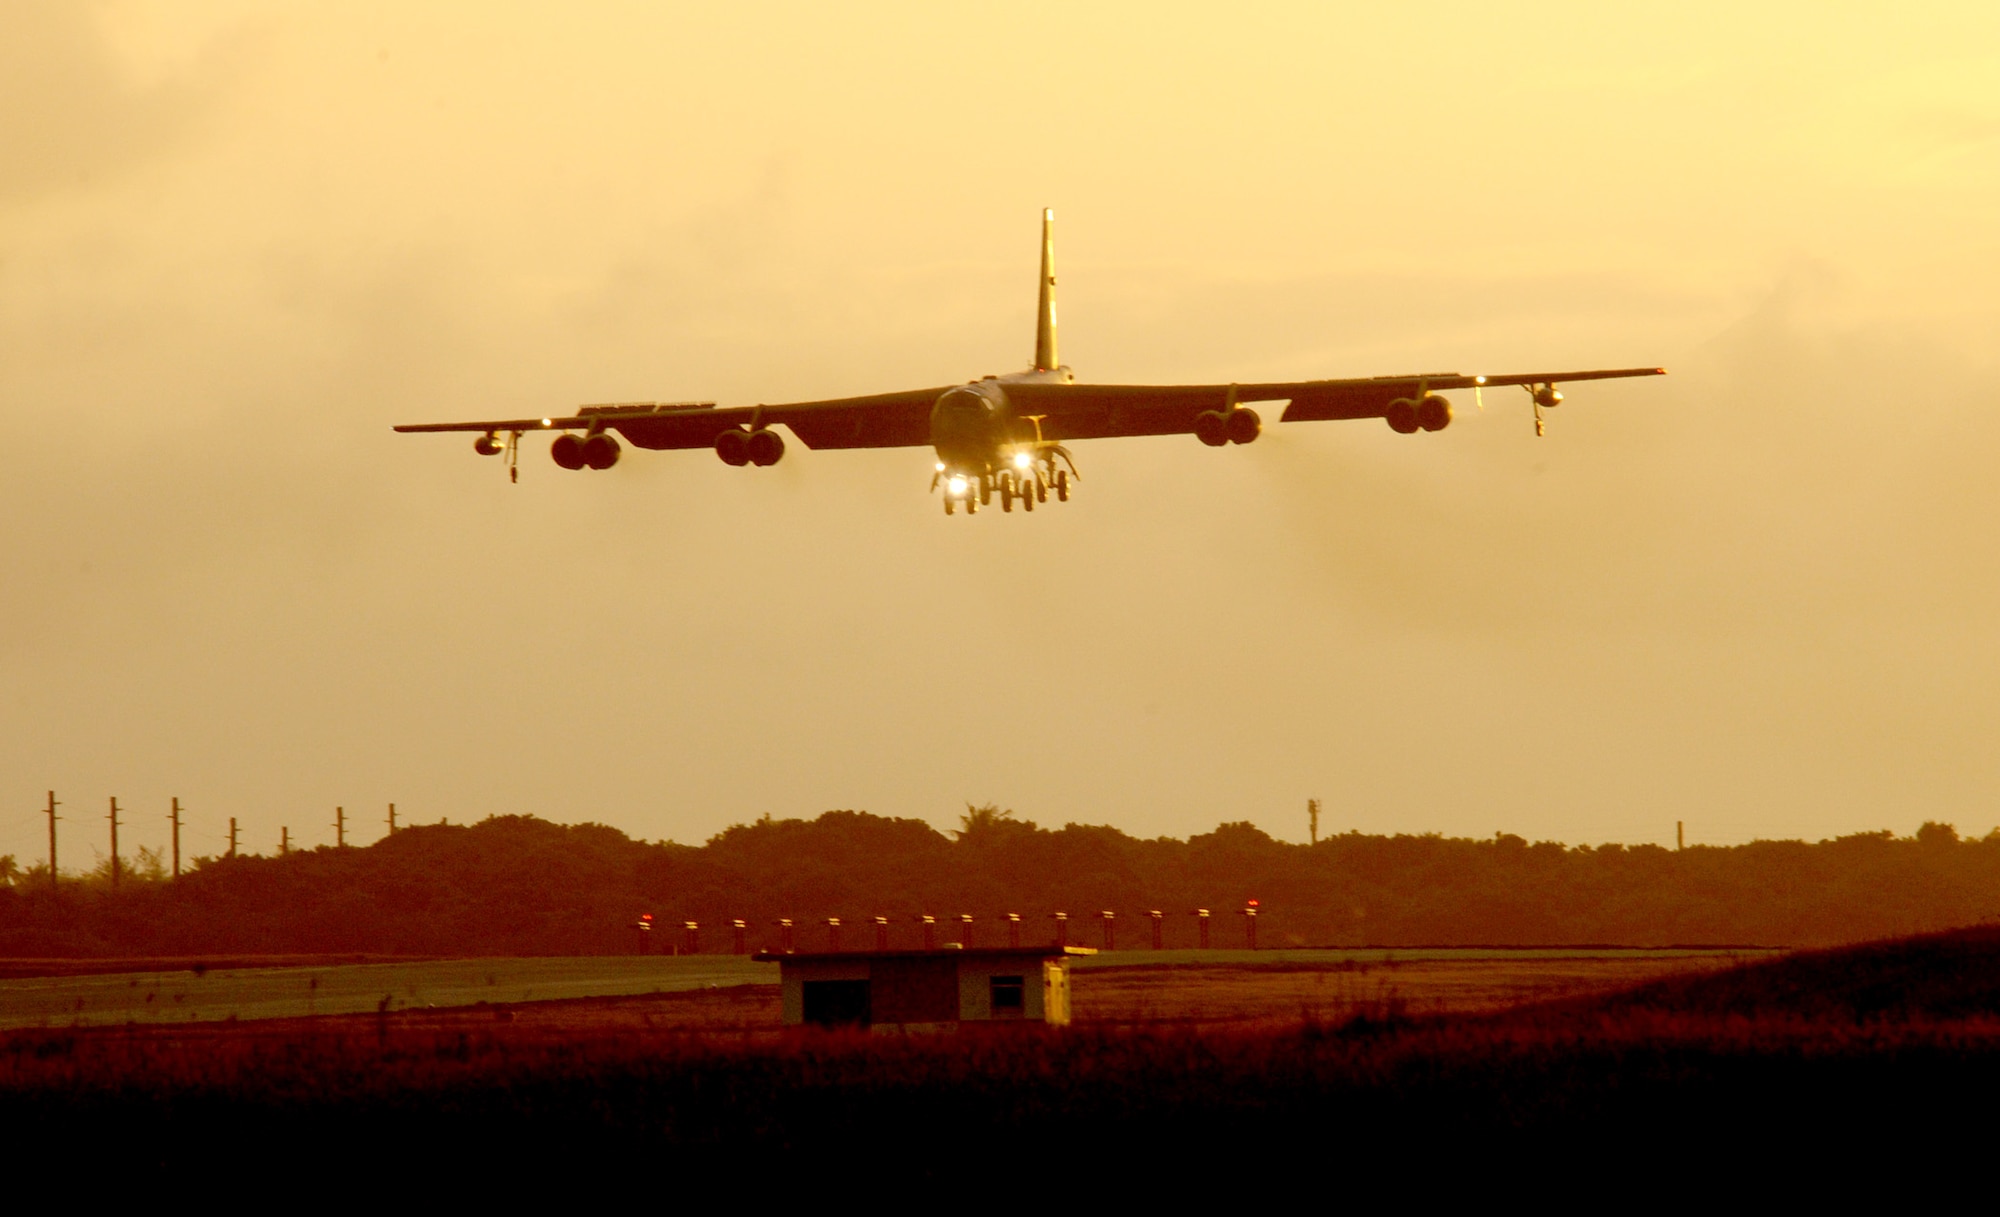 Air Force B-52 Stratofortresses, similar to the one pictured here, flew from Andersen Air Force Base, Guam, to the land Down Under to demonstrate the capability and flexibility of the Stratofortress to Australian military partners, as part of Exercise Hamel, Oct. 8 through 18. (U.S. Air Force photo/Master Sgt. Kevin J. Gruenwald)
